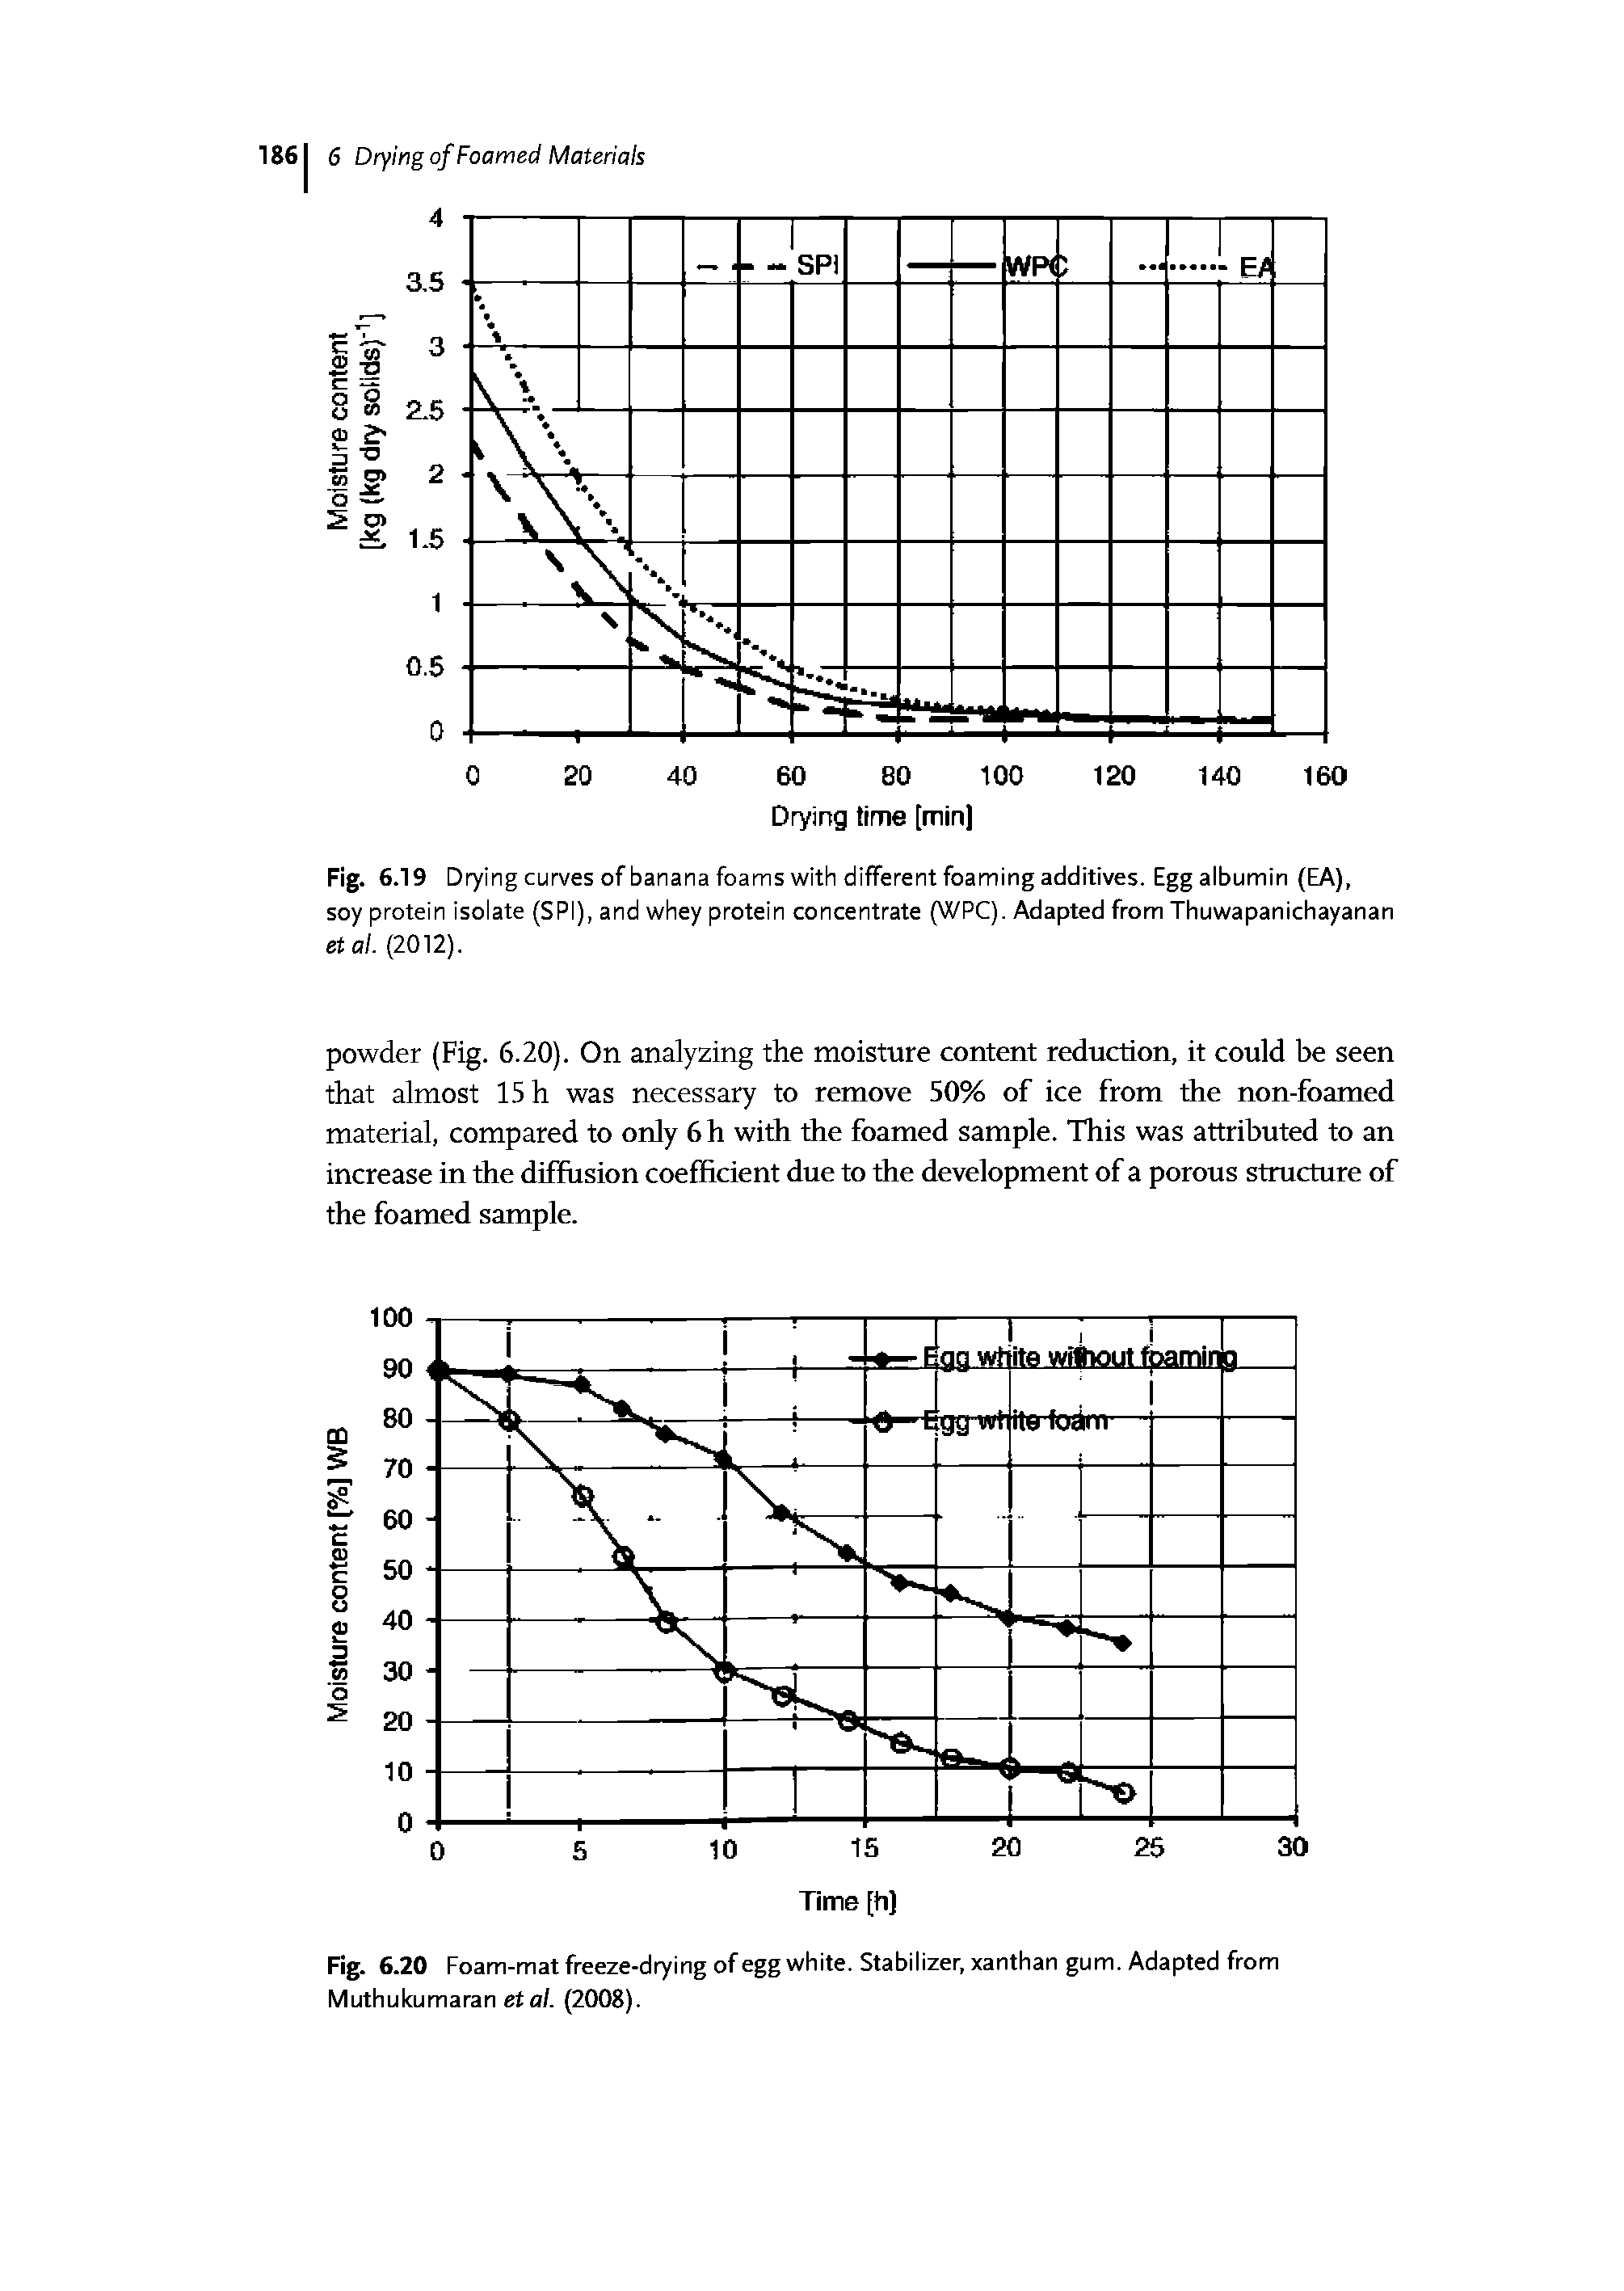 Fig. 6.19 D ing curves of banana foams with different foaming additives. Egg albumin (EA), soy protein isolate (SPI), and whey protein concentrate (WPC). Adapted from Thuwapanichayanan etal. (2012).